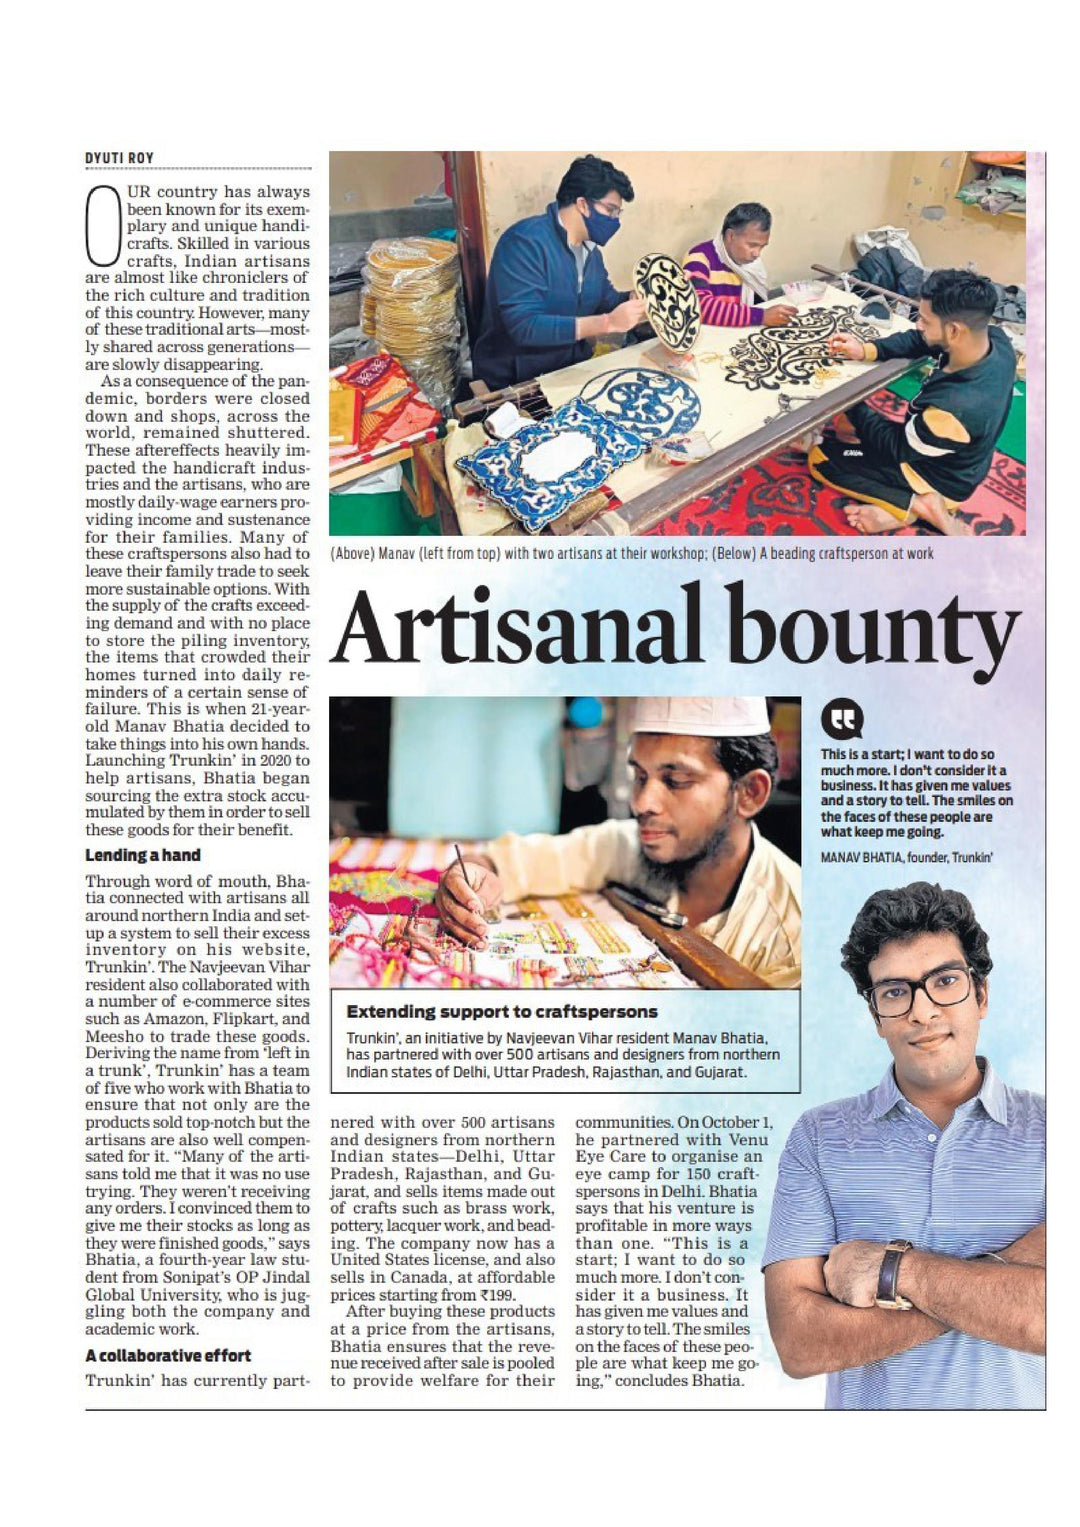 The Morning Standard (New Indian Express) - trunkin.in